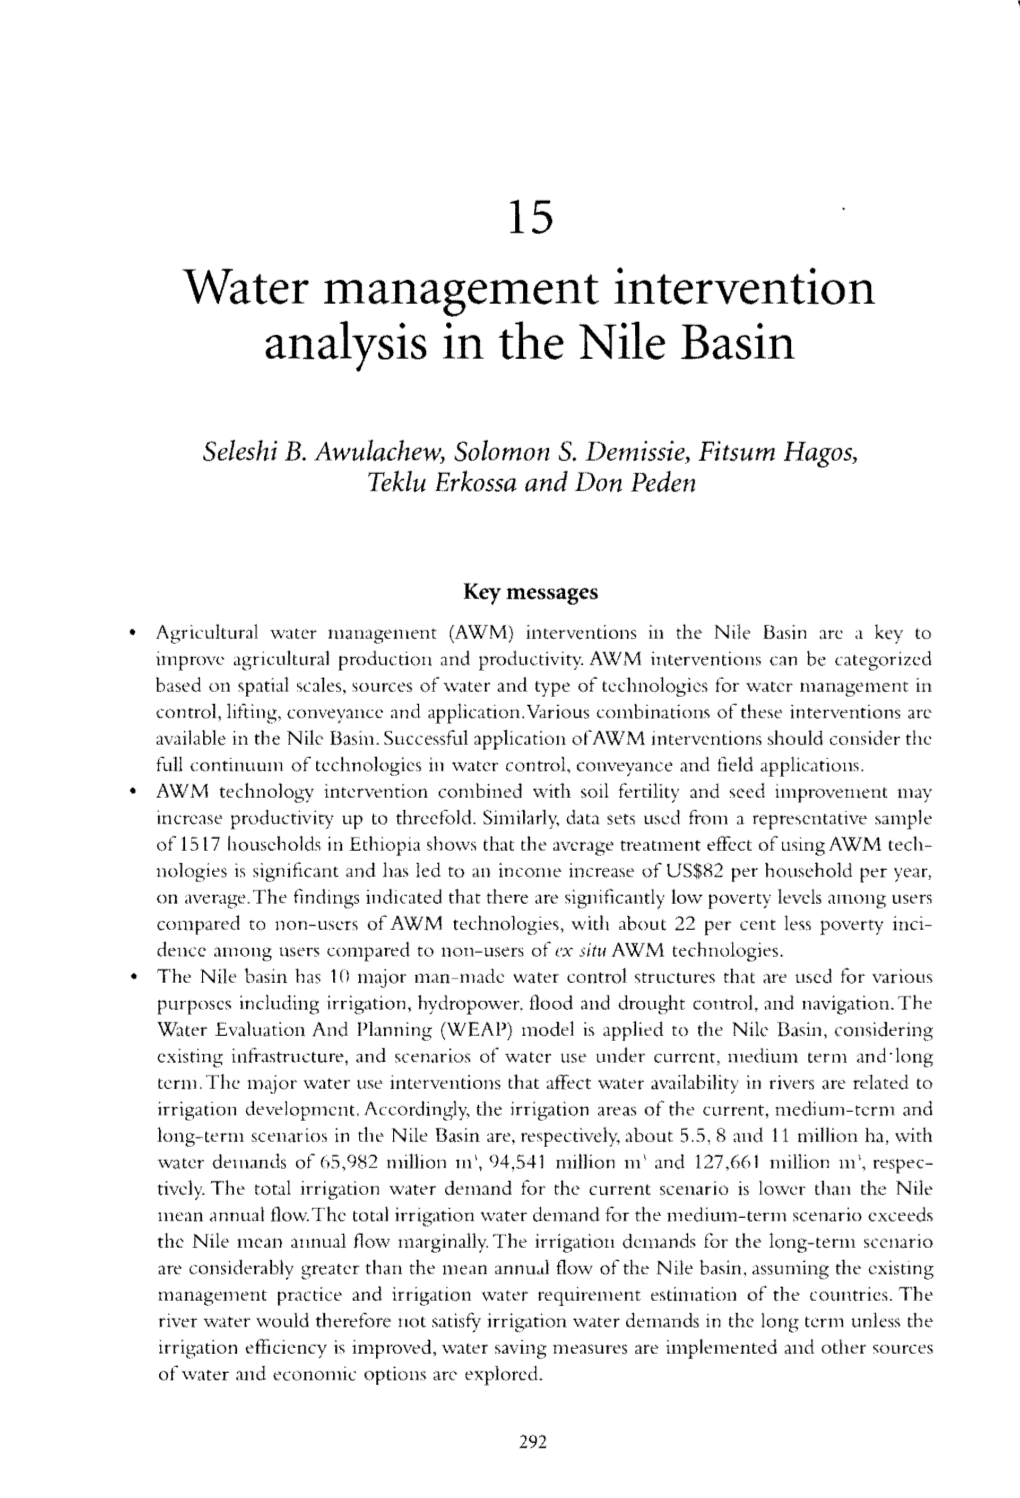 Water Management Intervention Analysis in the Nile Basin